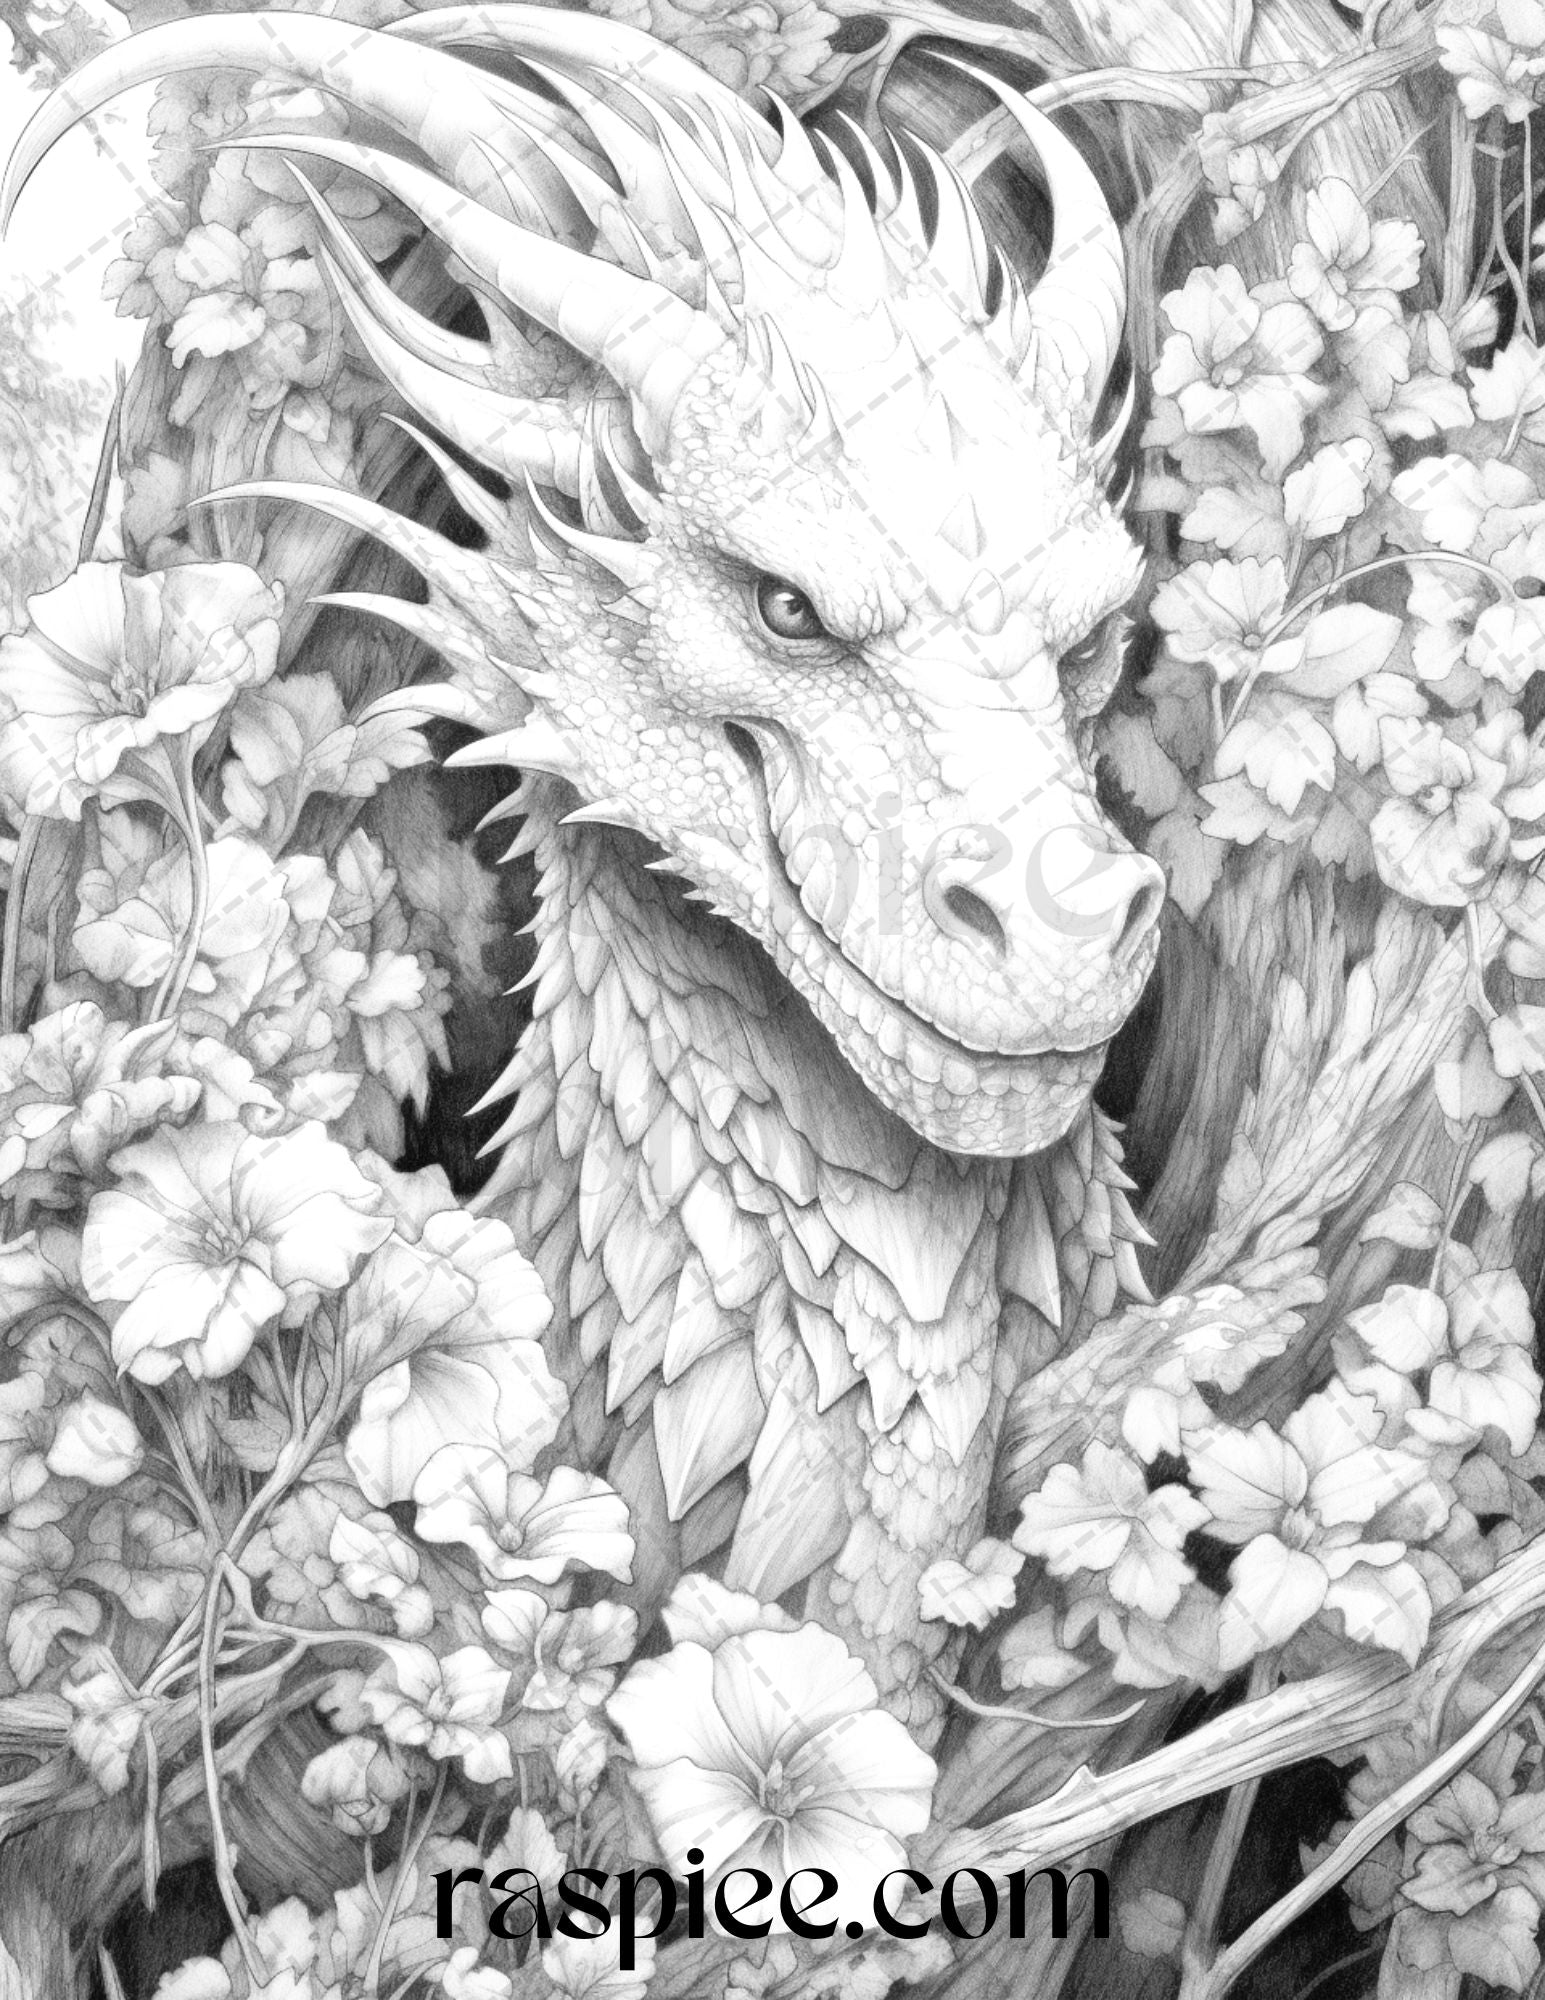 Grayscale flower dragon coloring page for adults, Detailed printable coloring page for relaxation, Intricate grayscale artwork of a floral dragon